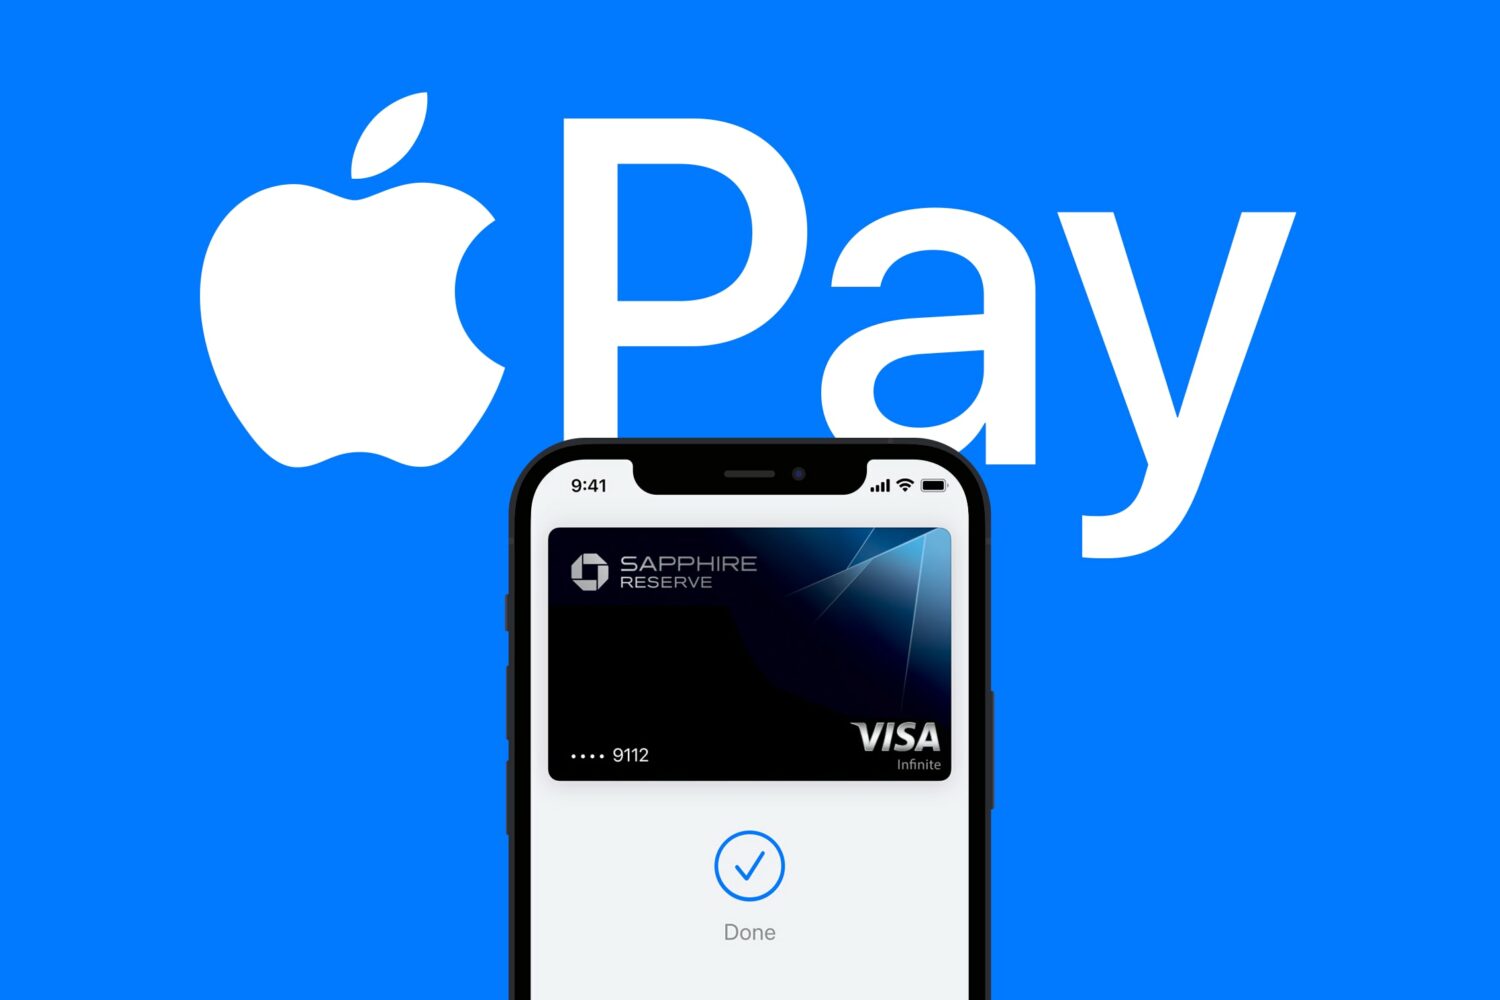 Composition showing Apple Pay on an iPhone set against a solid blue background with "Apple Pay" printed in white lettering